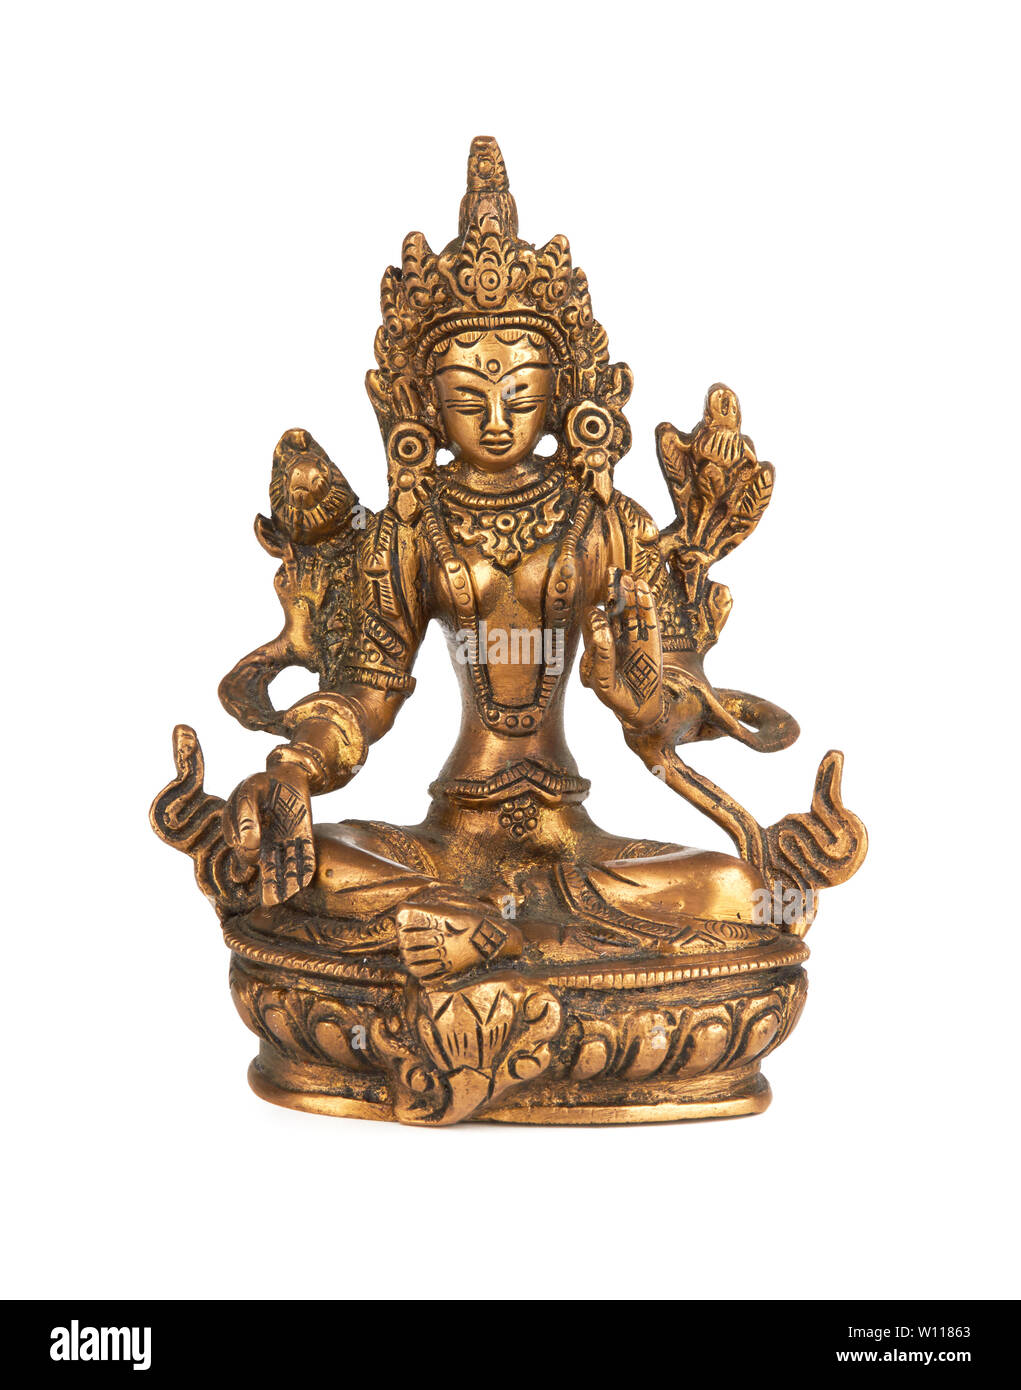 Tibetan Buddhist Deity Brass Statue Large Size Finest Physician The World Has Ever Seen Exotic India 